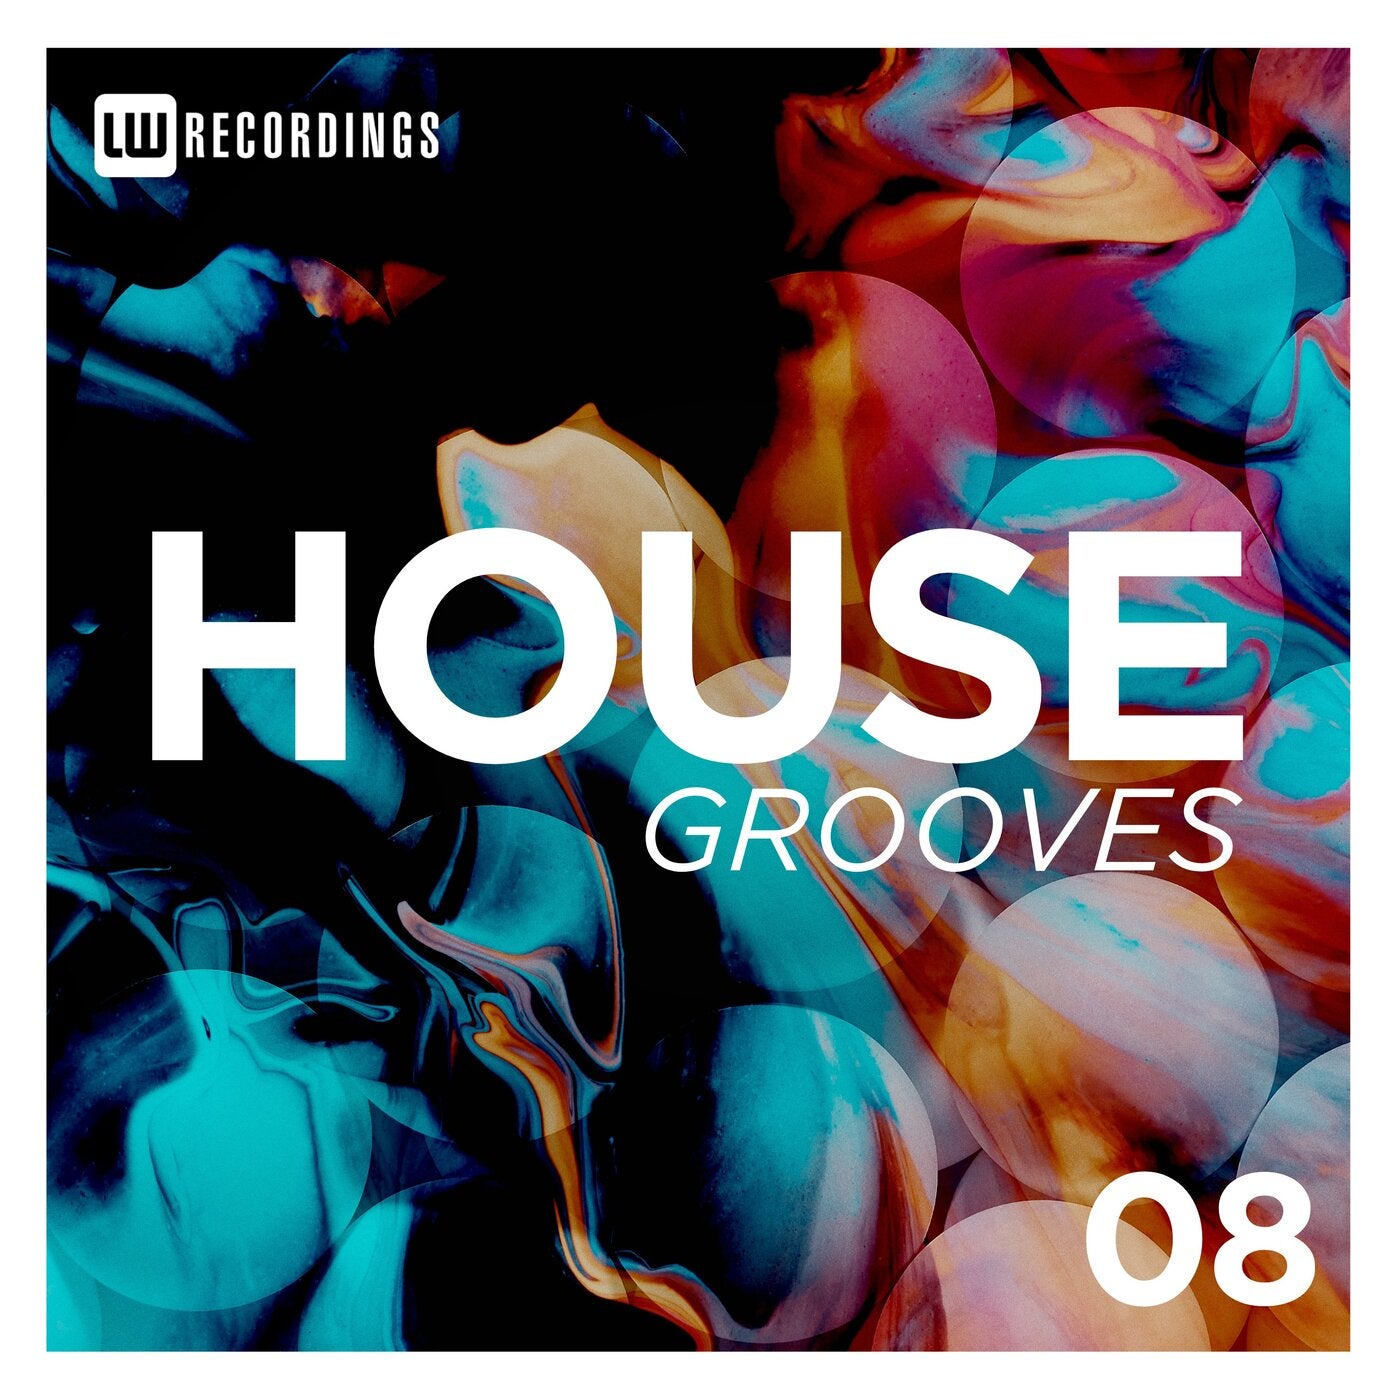 House Grooves, Vol. 08